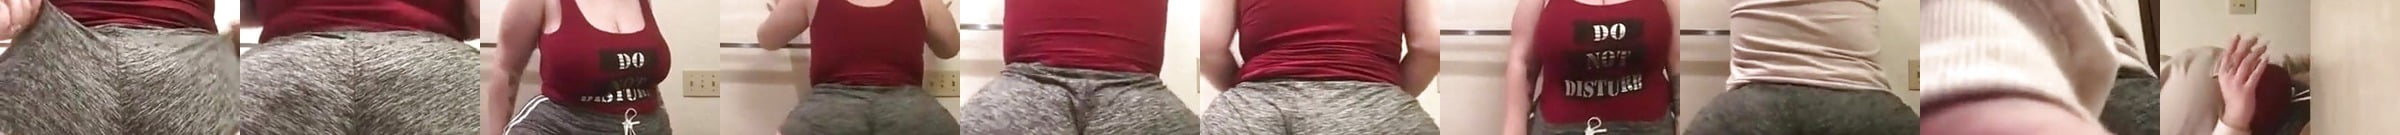 Sexy Thighs Porn Videos Xhamster